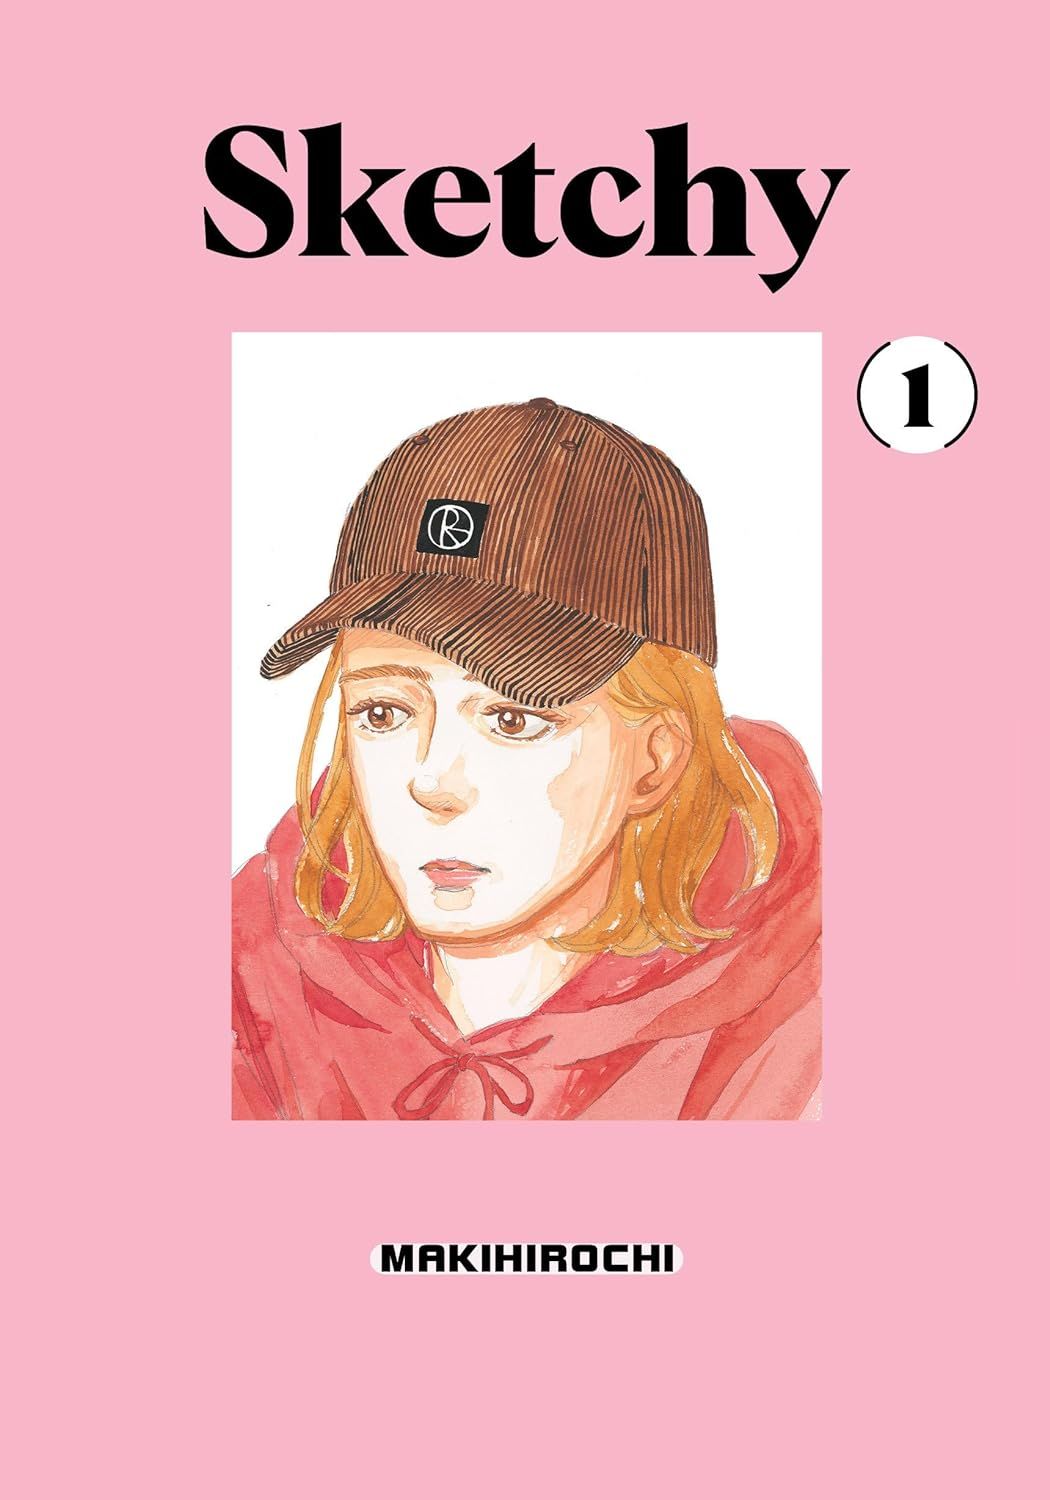 Sketchy by MAKIHIROCHI cover